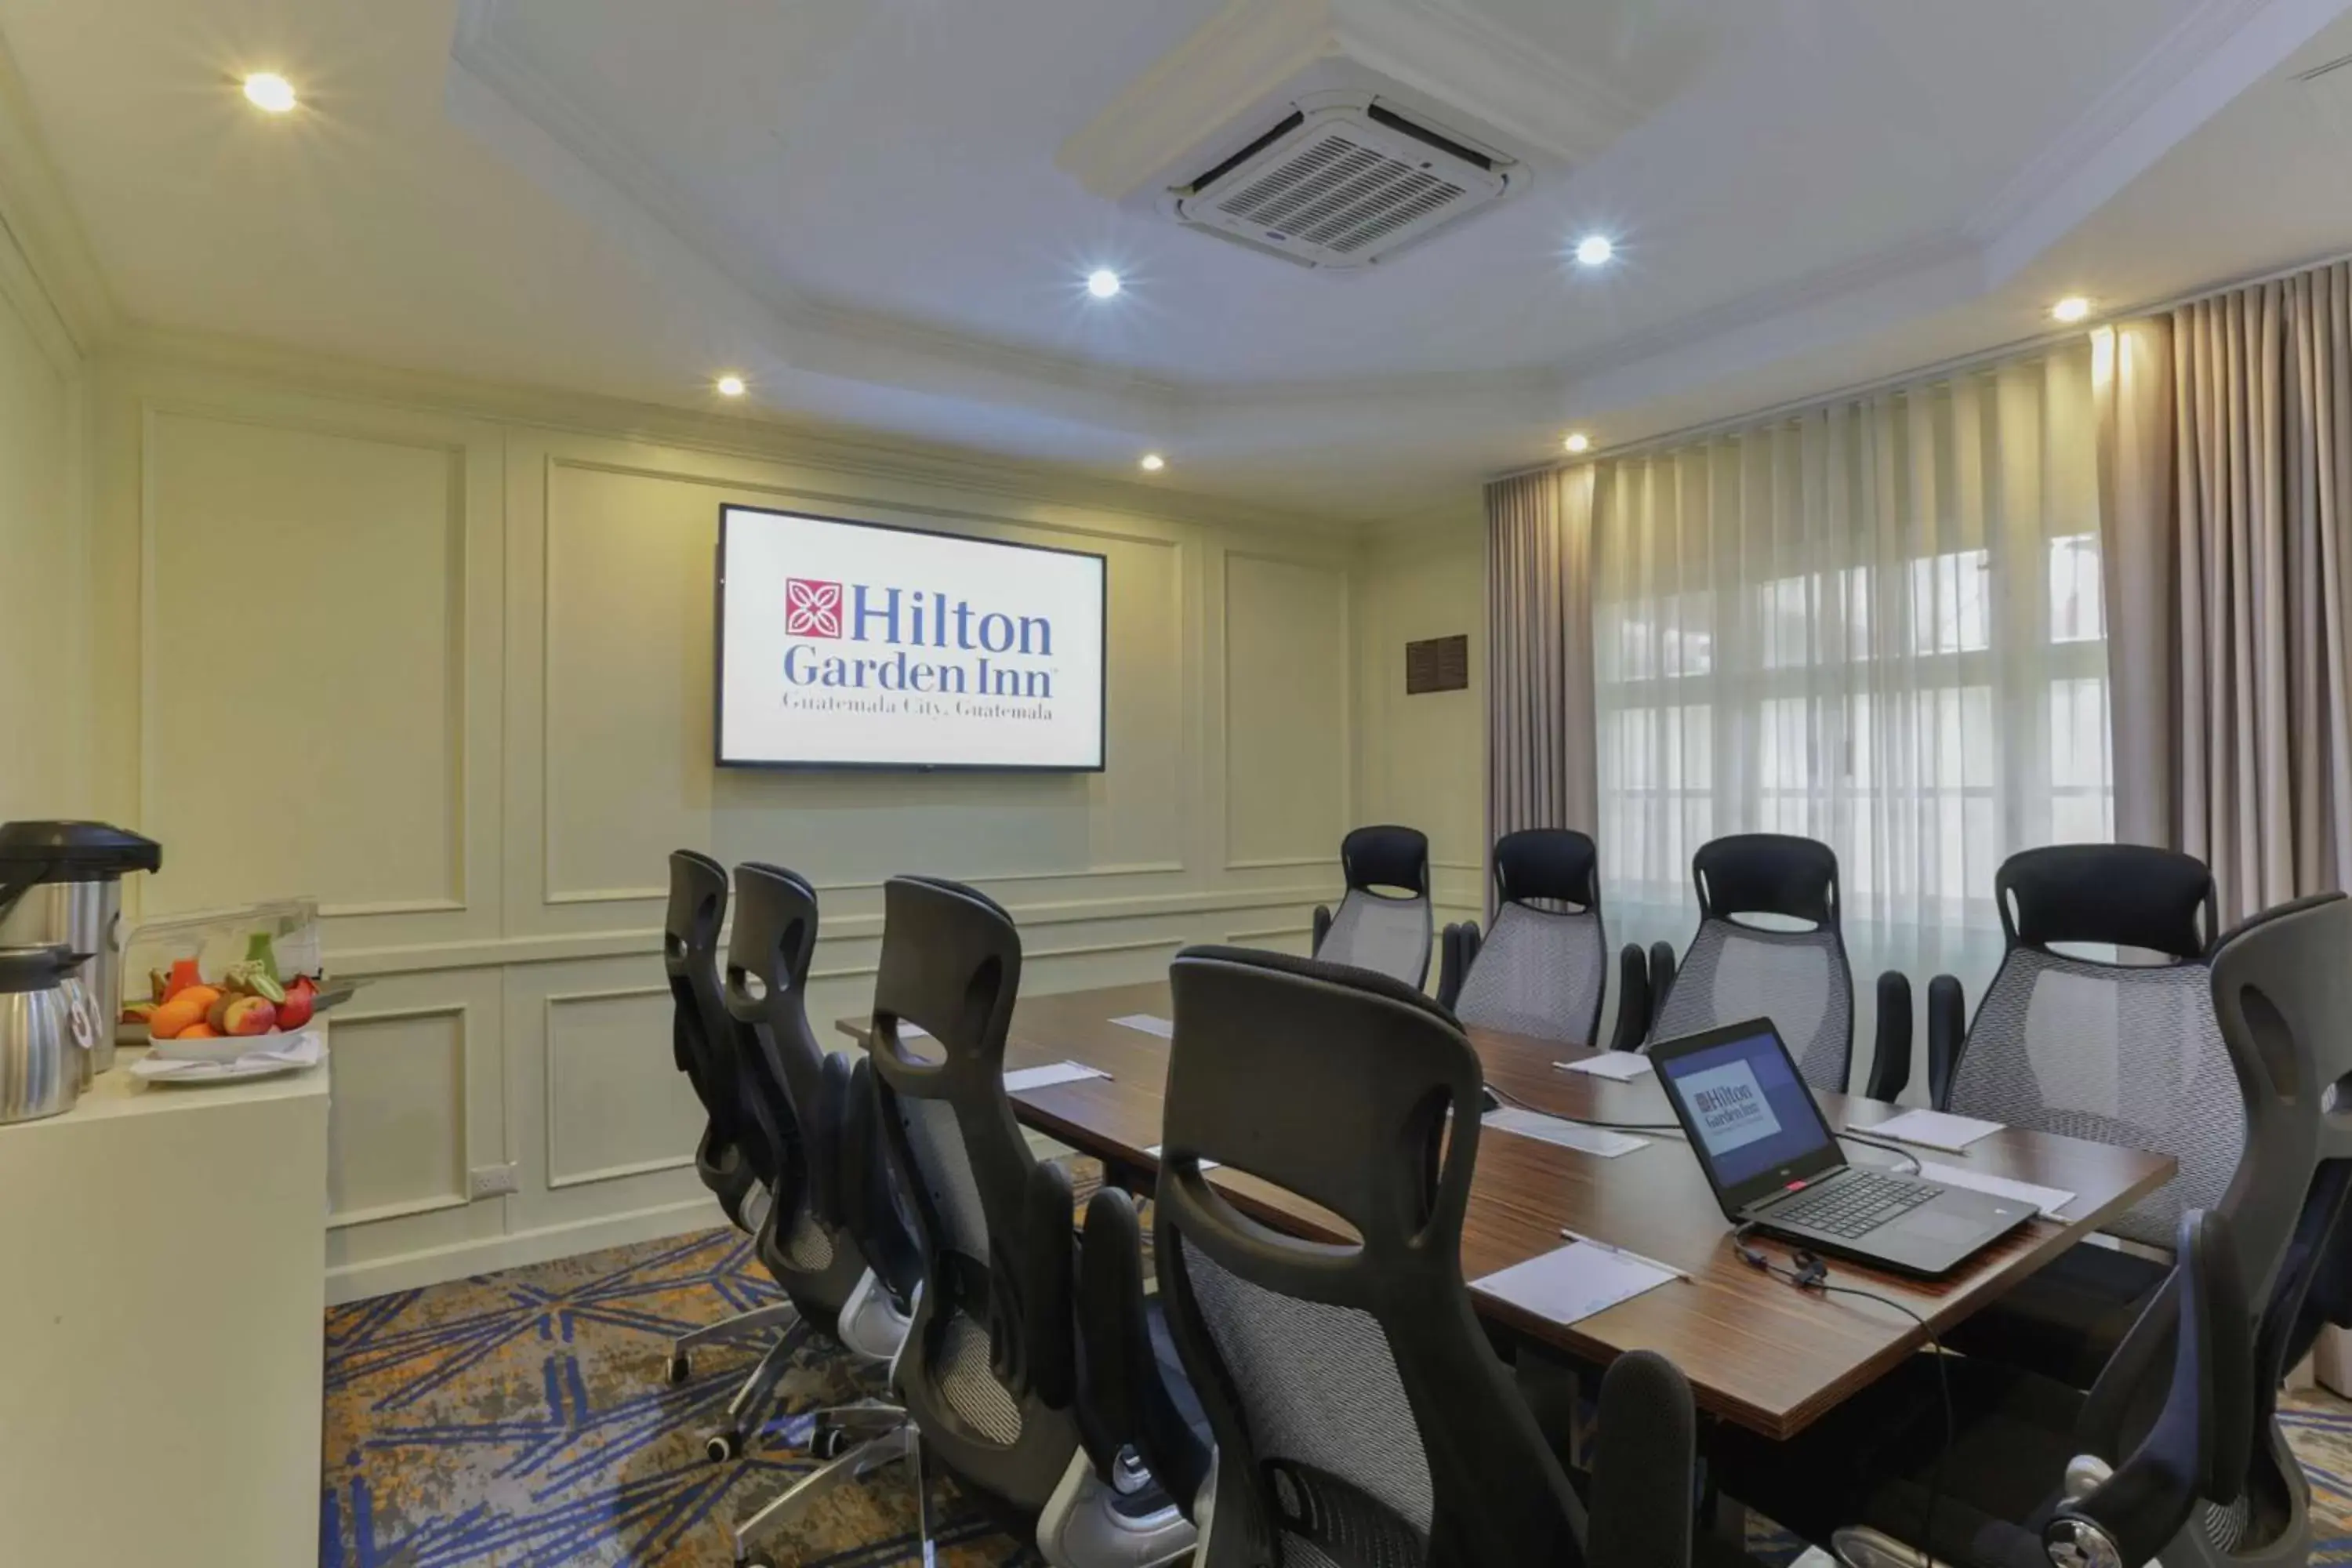 Meeting/conference room, Business Area/Conference Room in Hilton Garden Inn Guatemala City